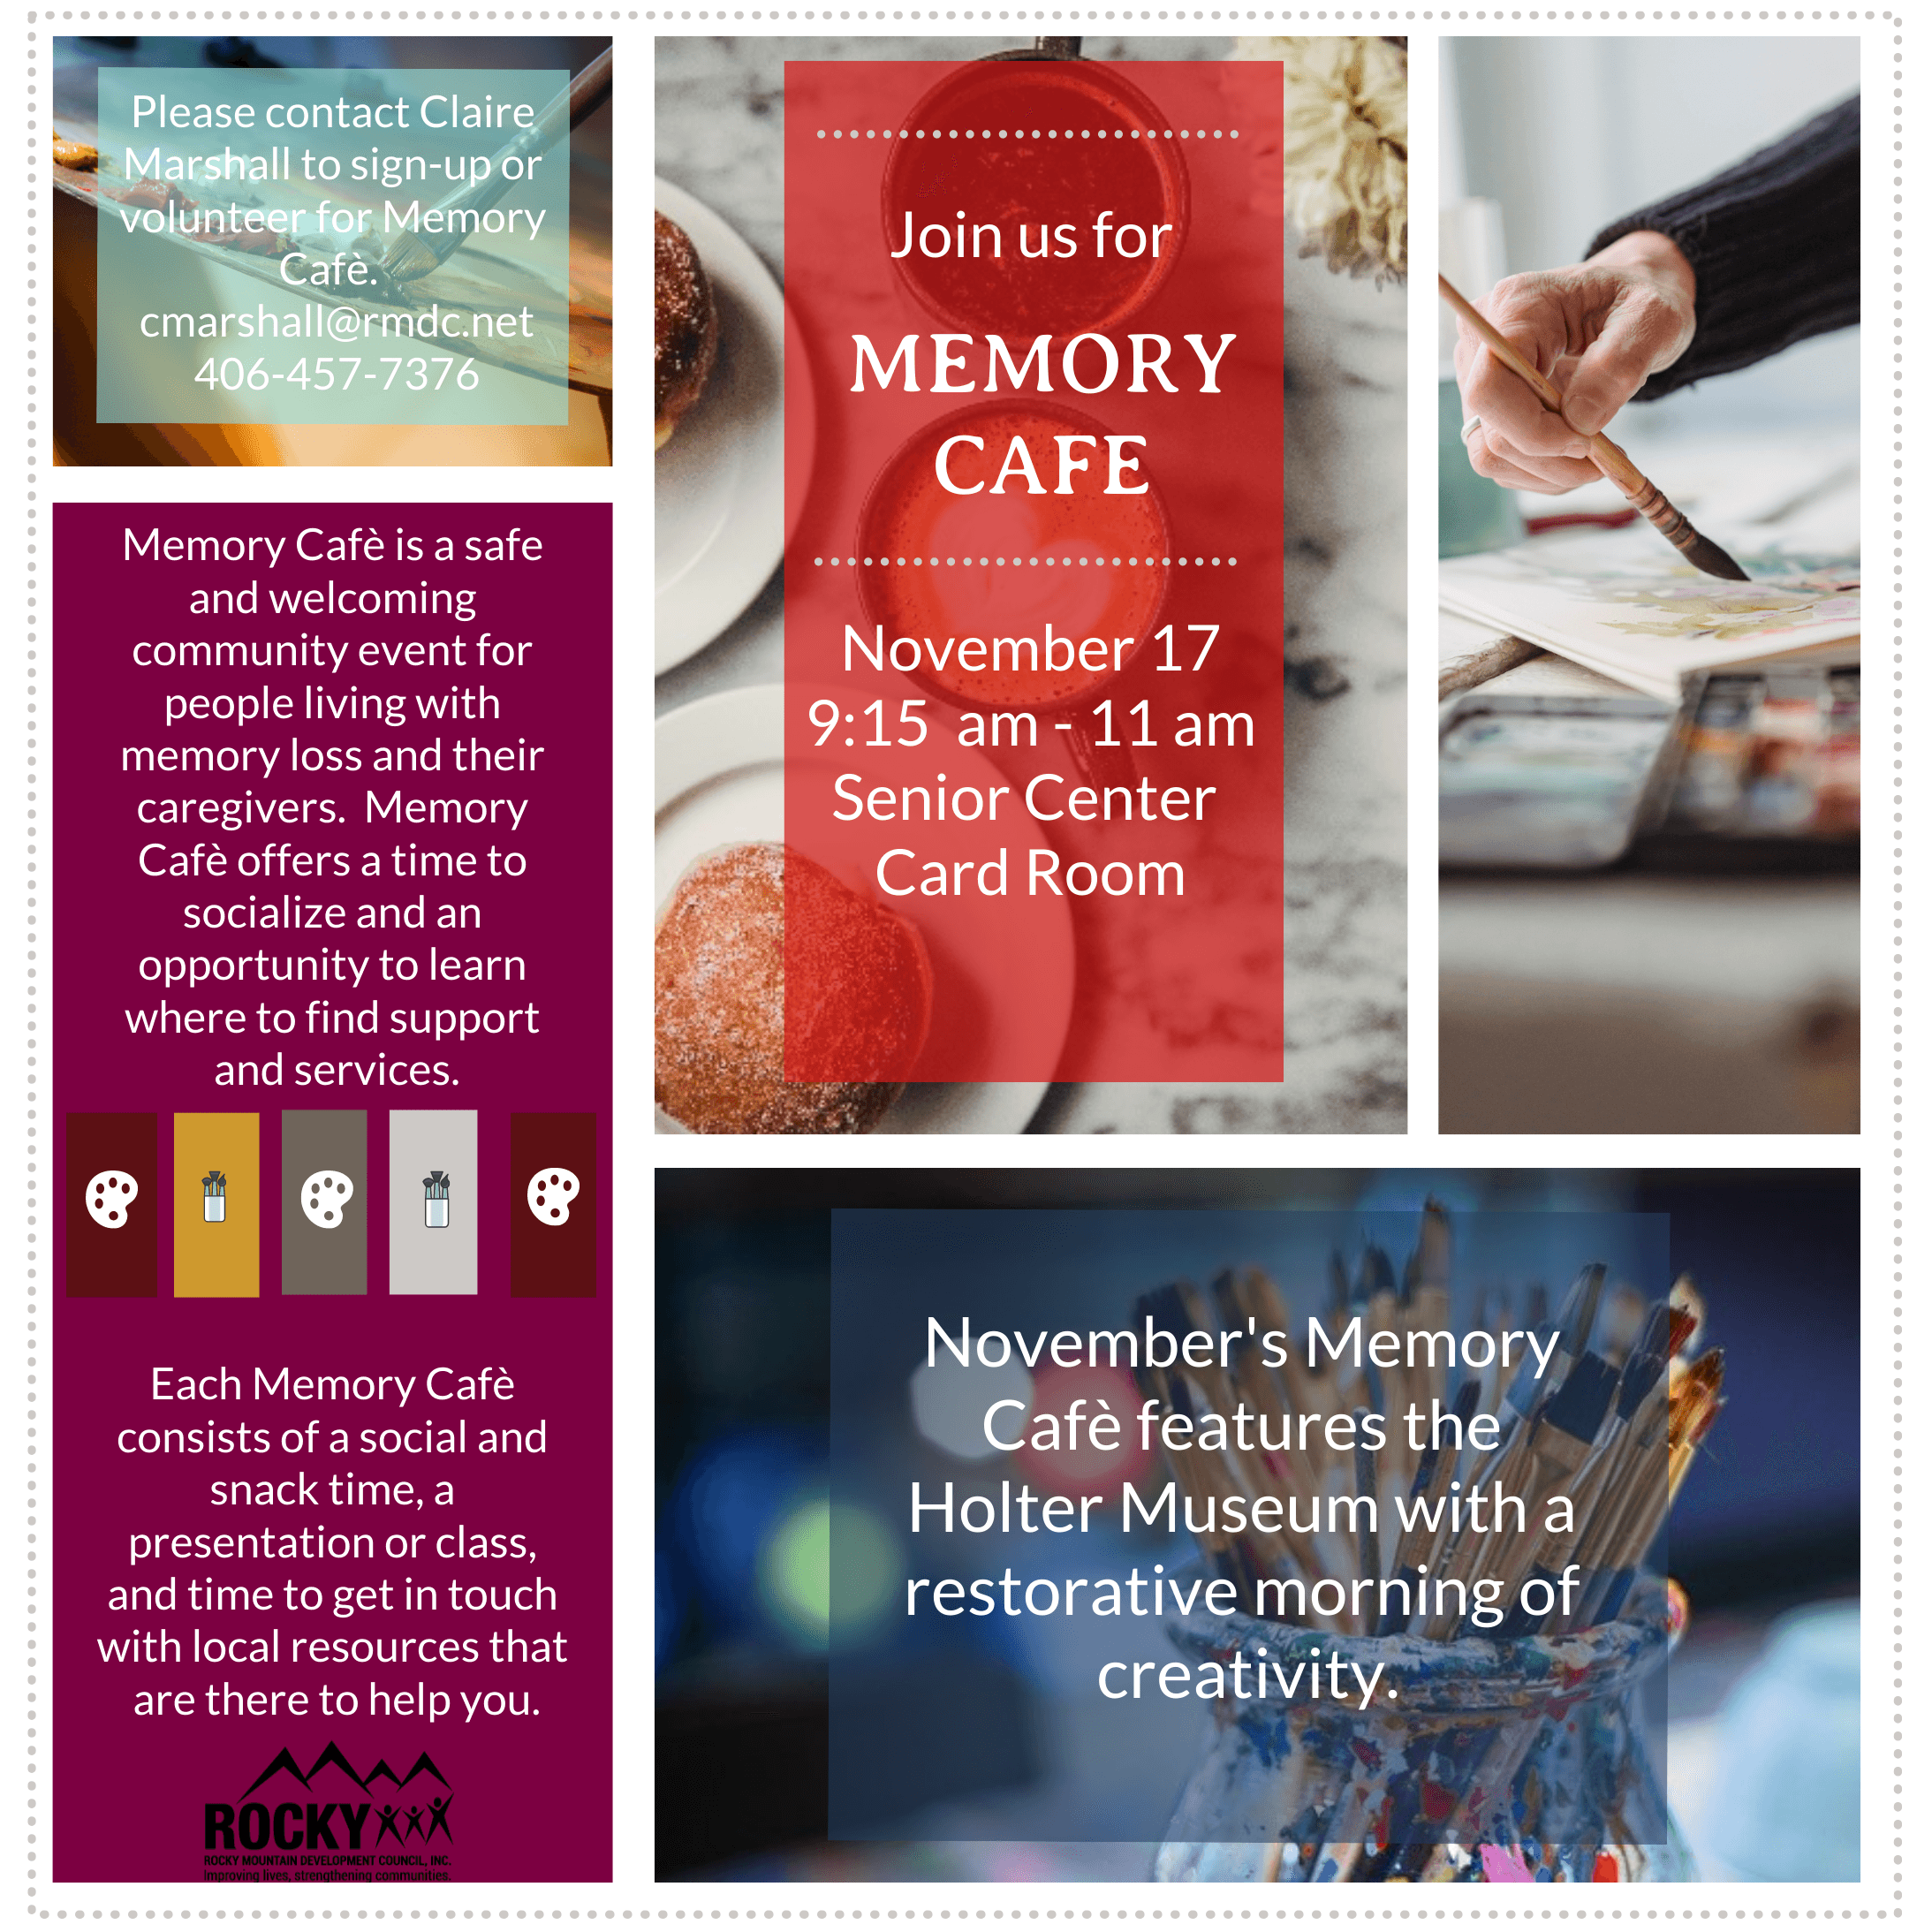 The Holter Museum of Art will join us on Wednesday, November 17 for Memory Cafè.